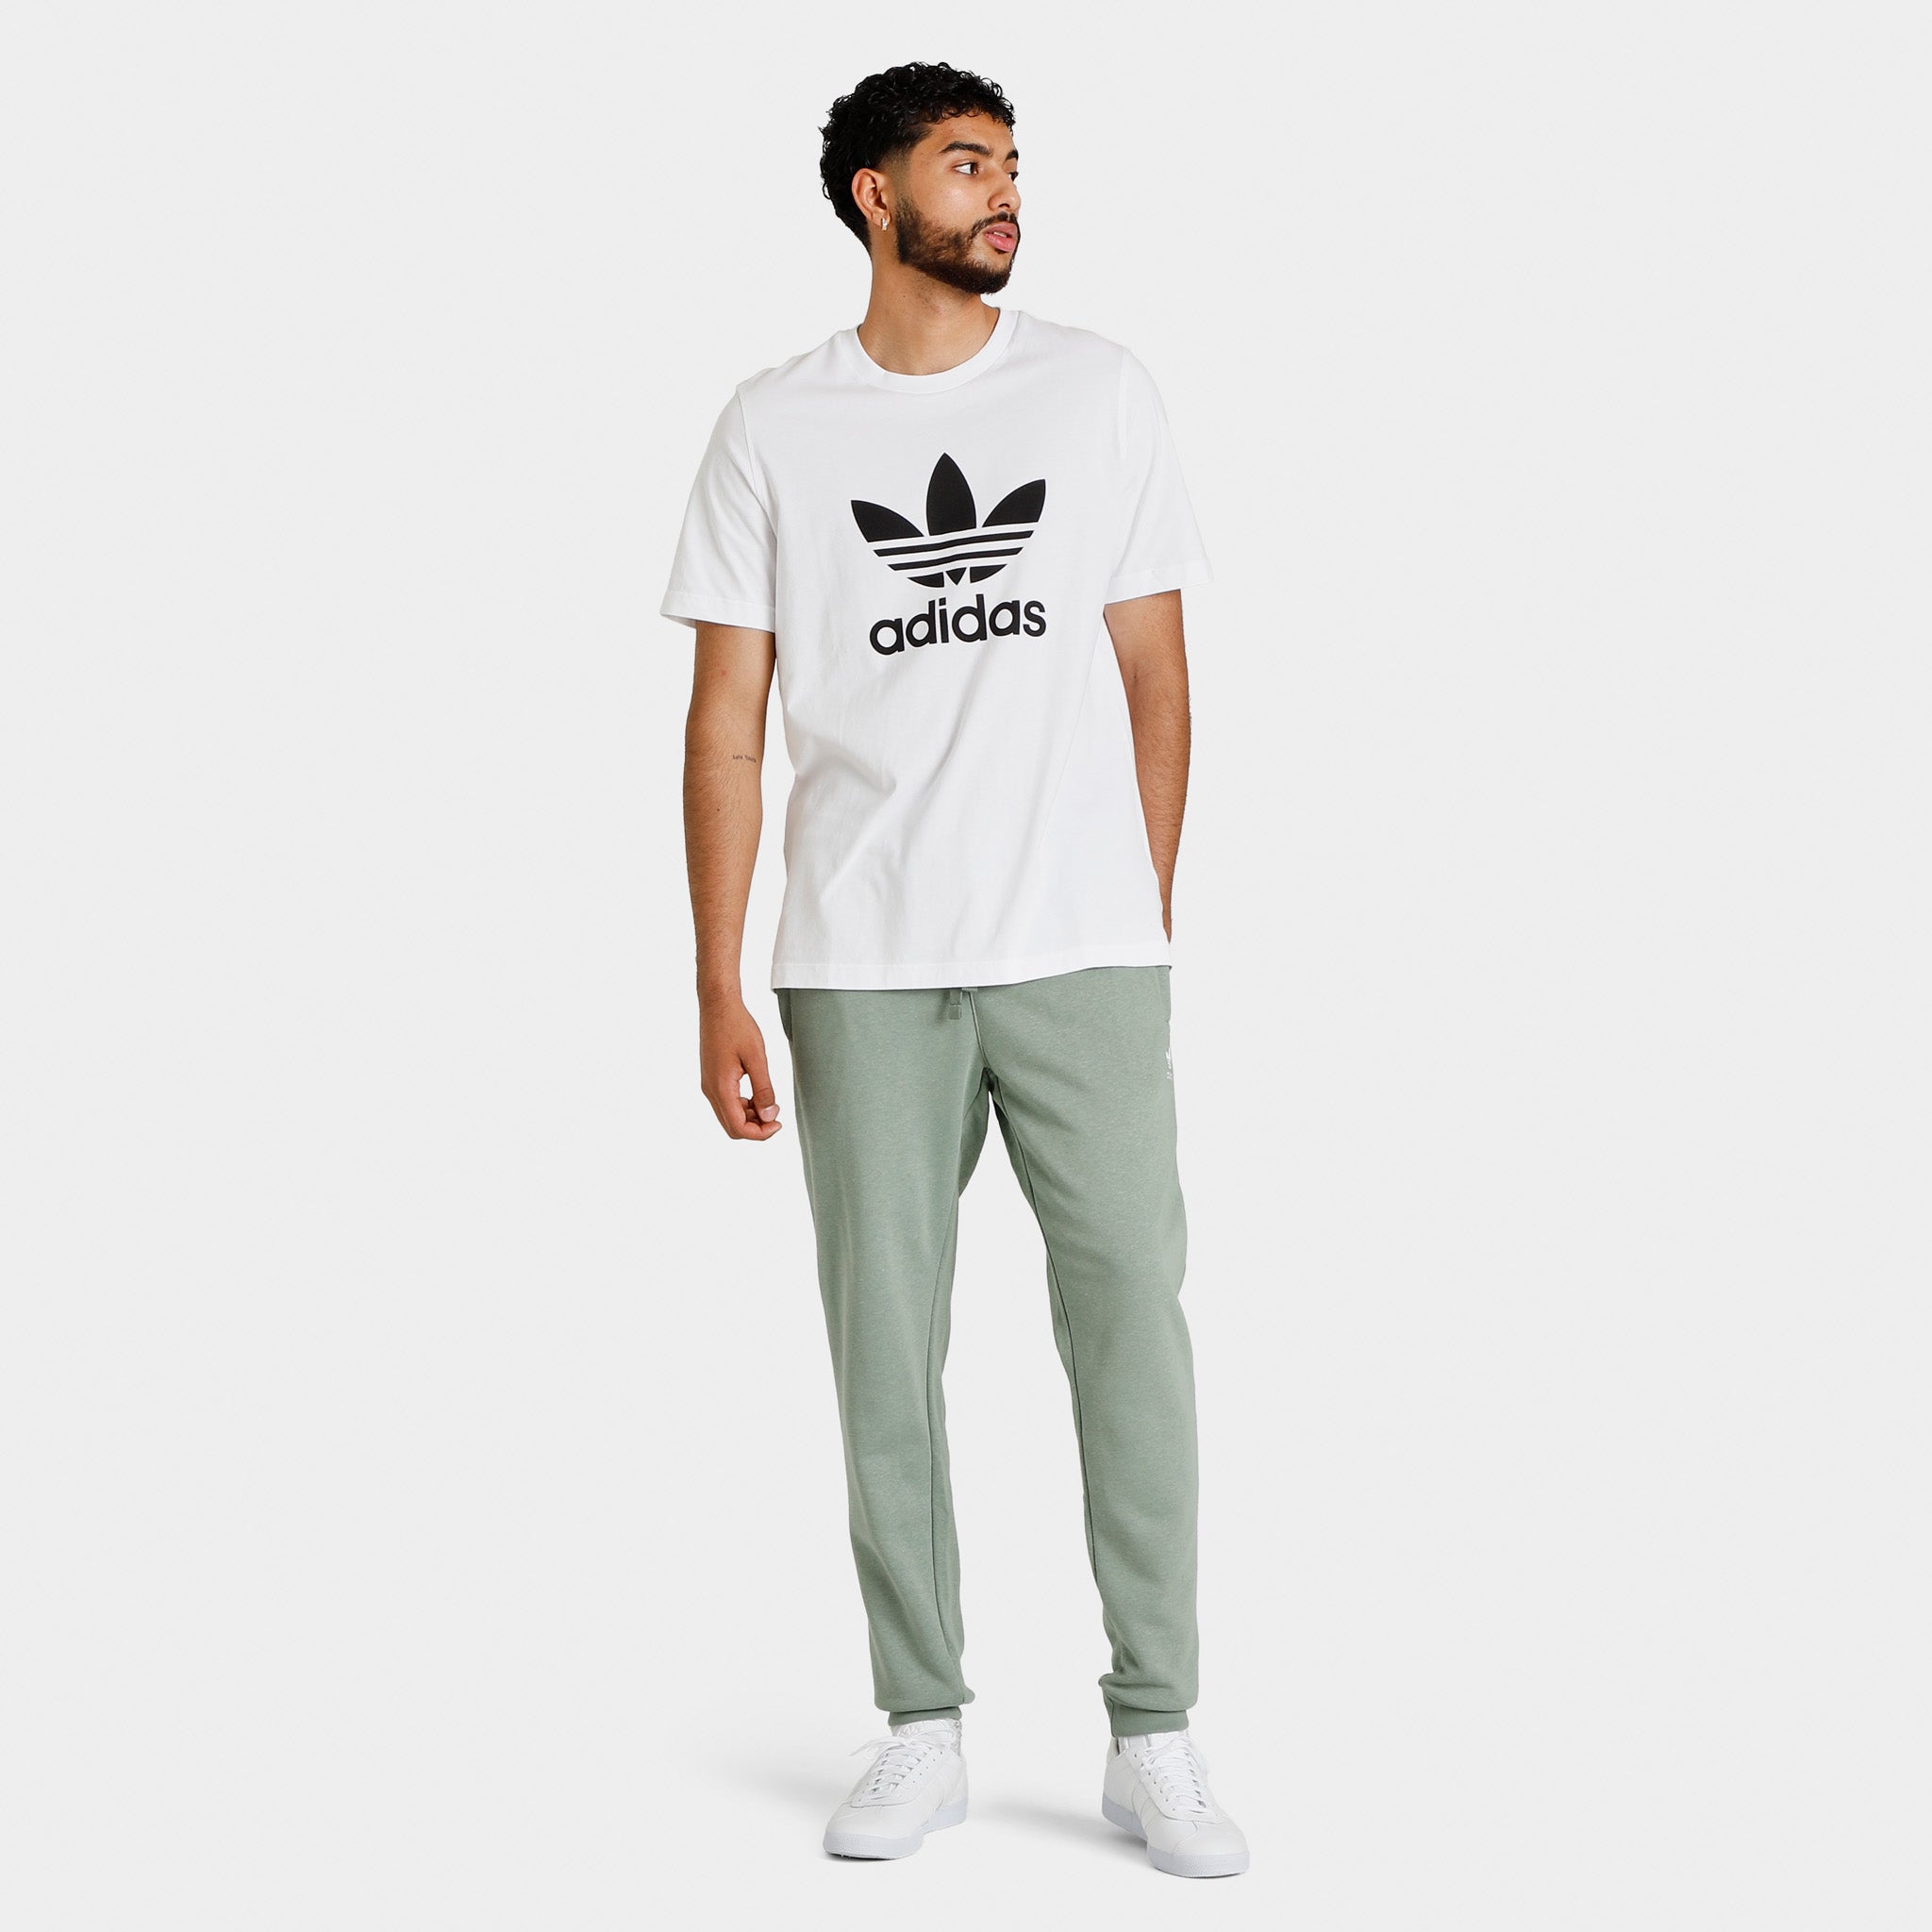 Only 42.00 usd for adidas Originals Essentials+ Made with Hemp Pants / Silver  Green Online at the Shop